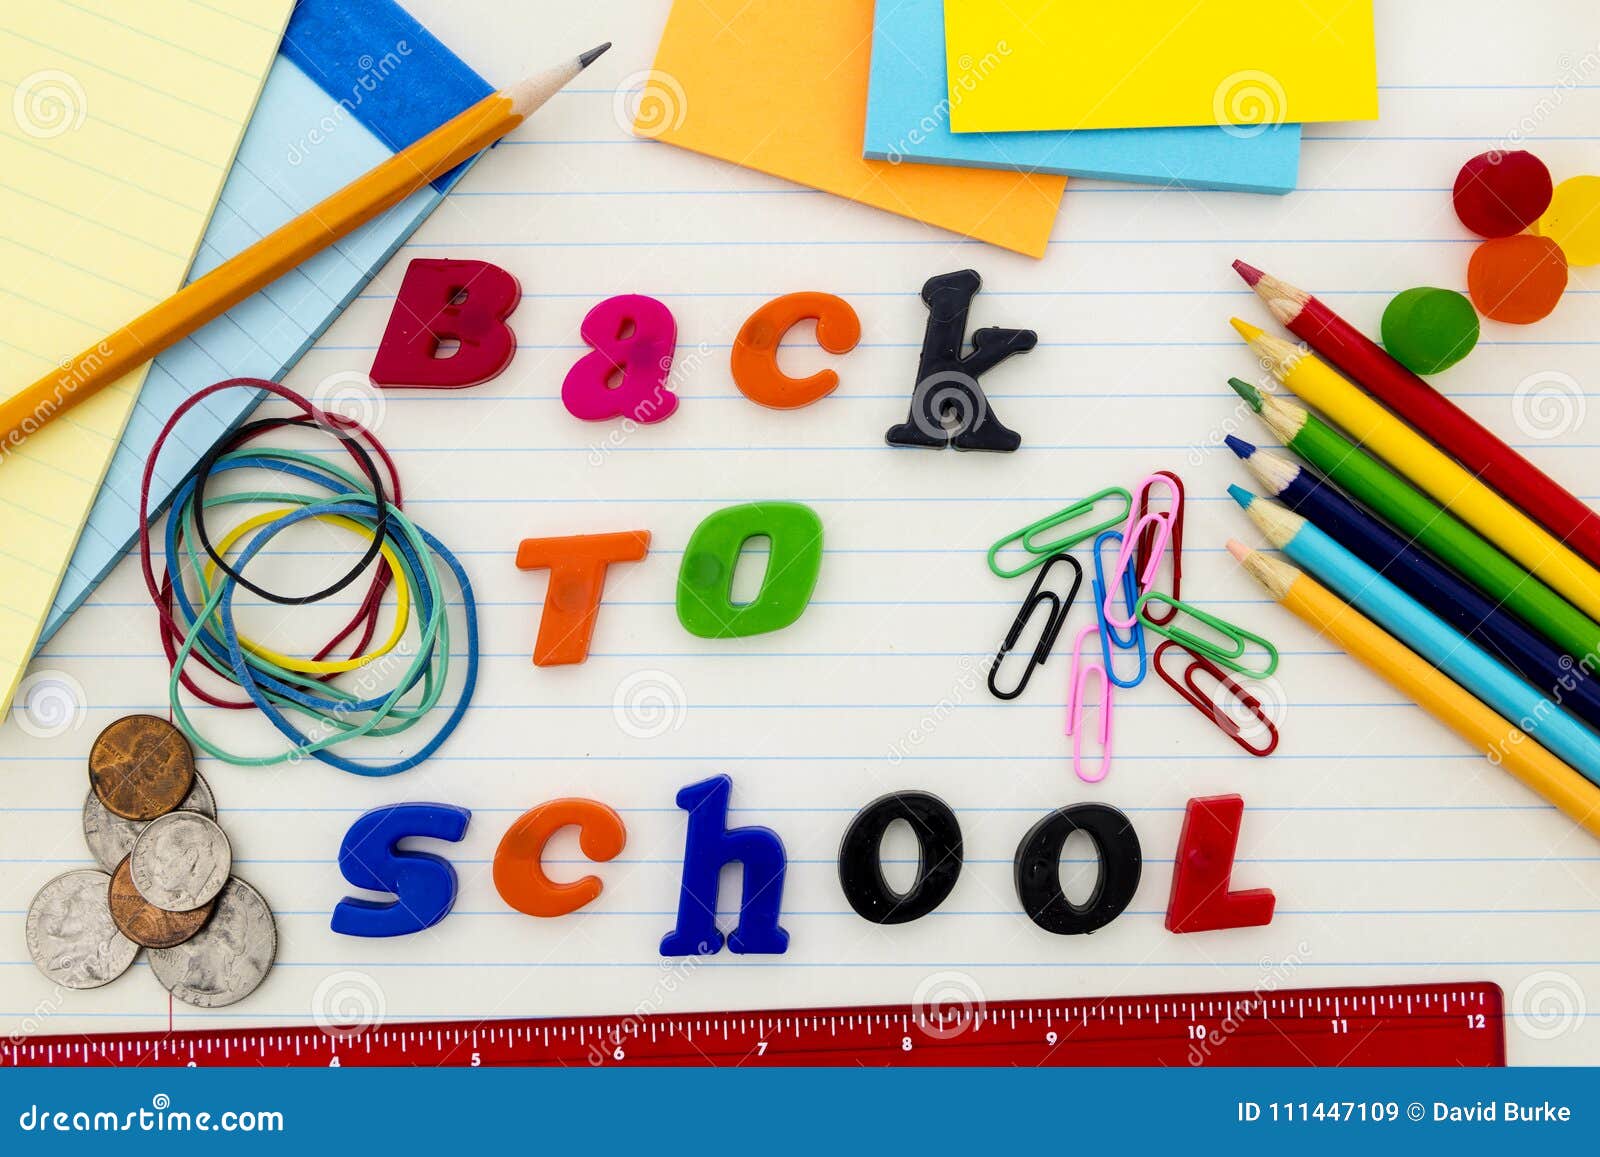 Back To School Message Supplies Encouragement Stock Image - Image of  background, alphabet: 111447109